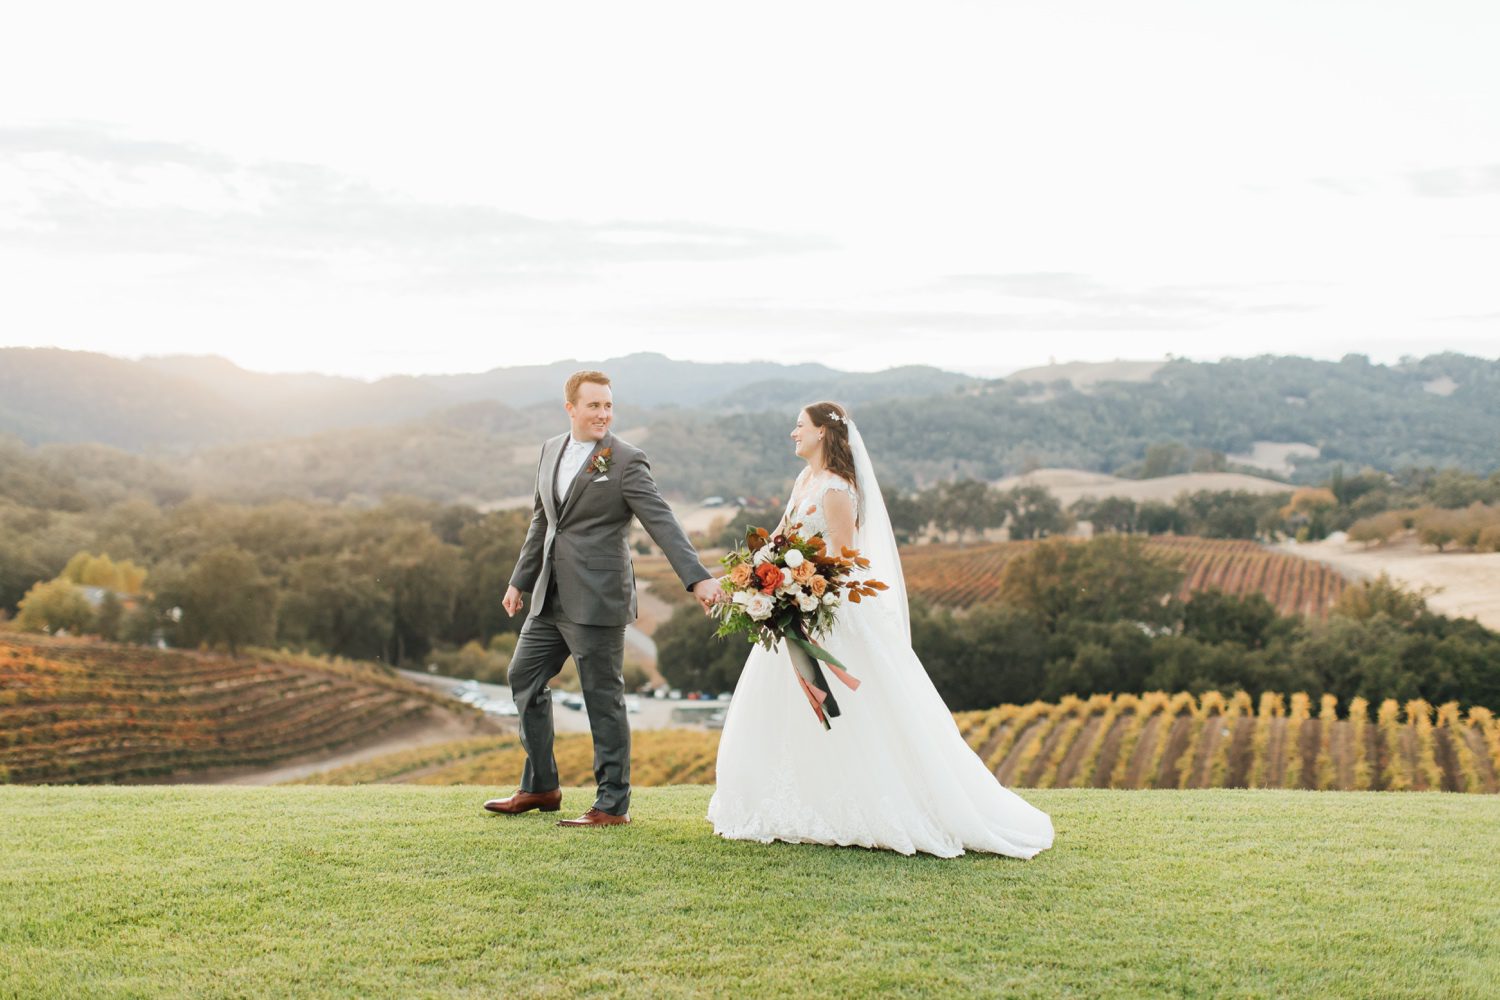 Groom leading bride on a hill in California